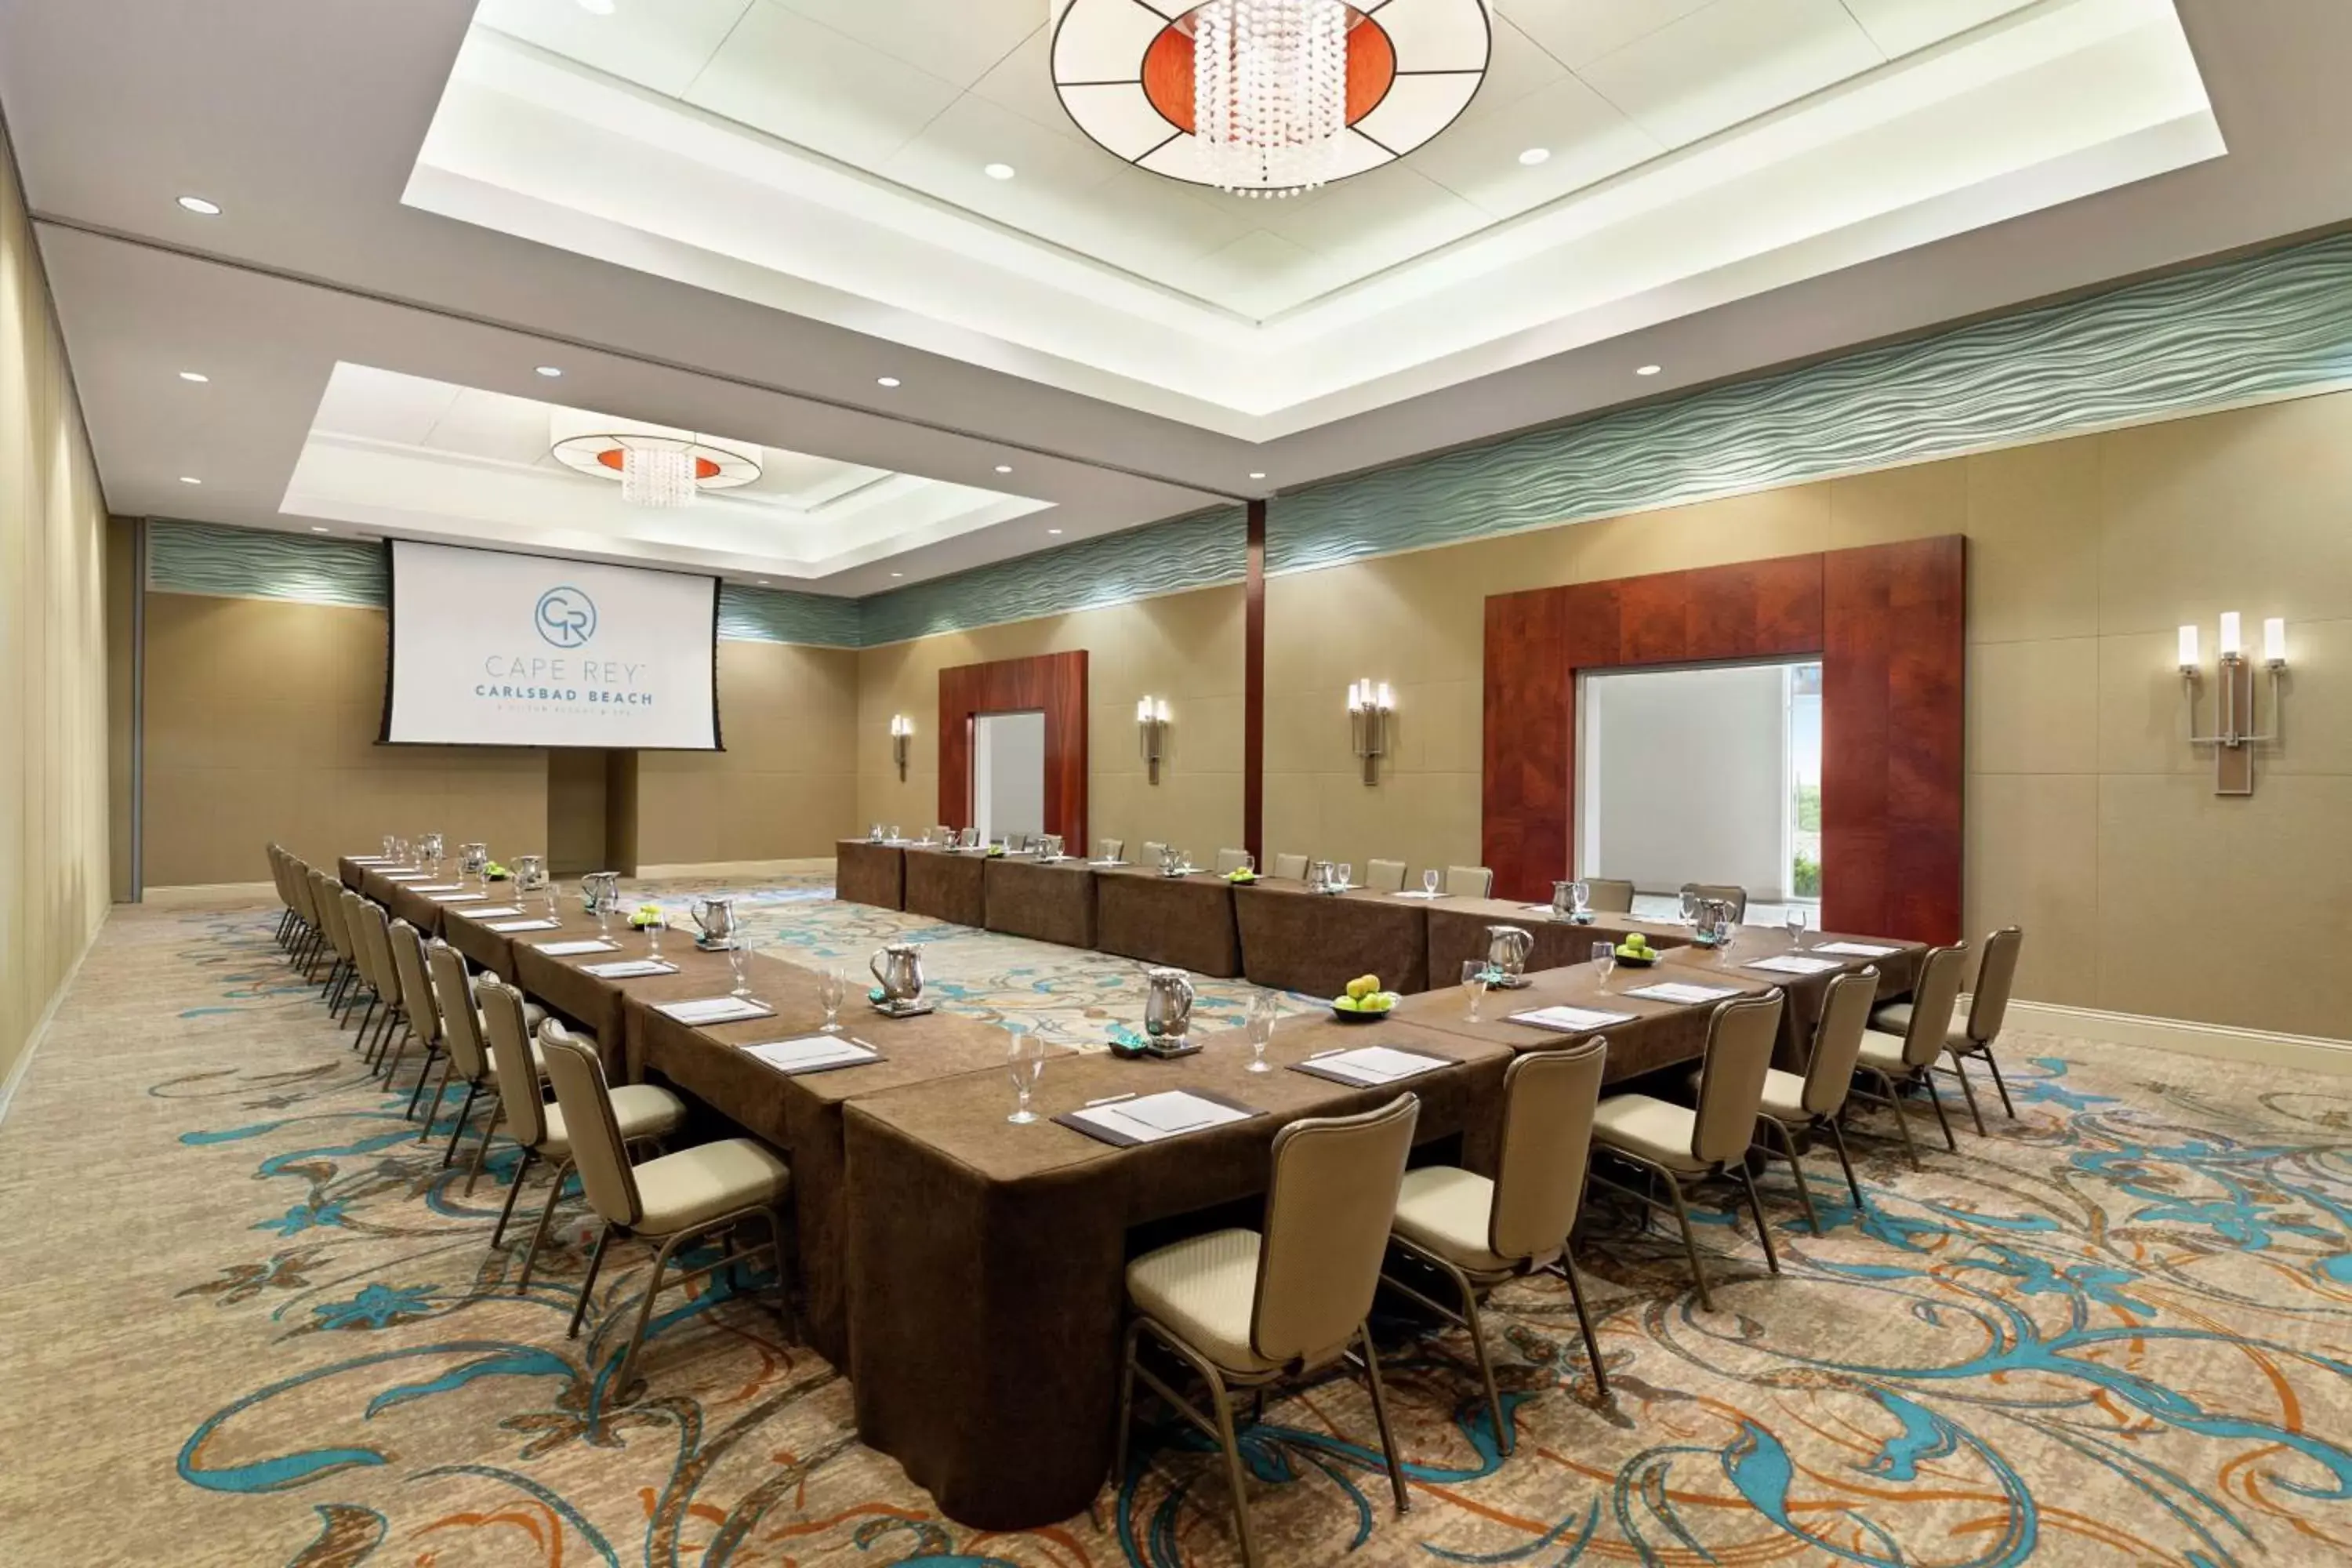 Meeting/conference room in Cape Rey Carlsbad Beach, A Hilton Resort & Spa